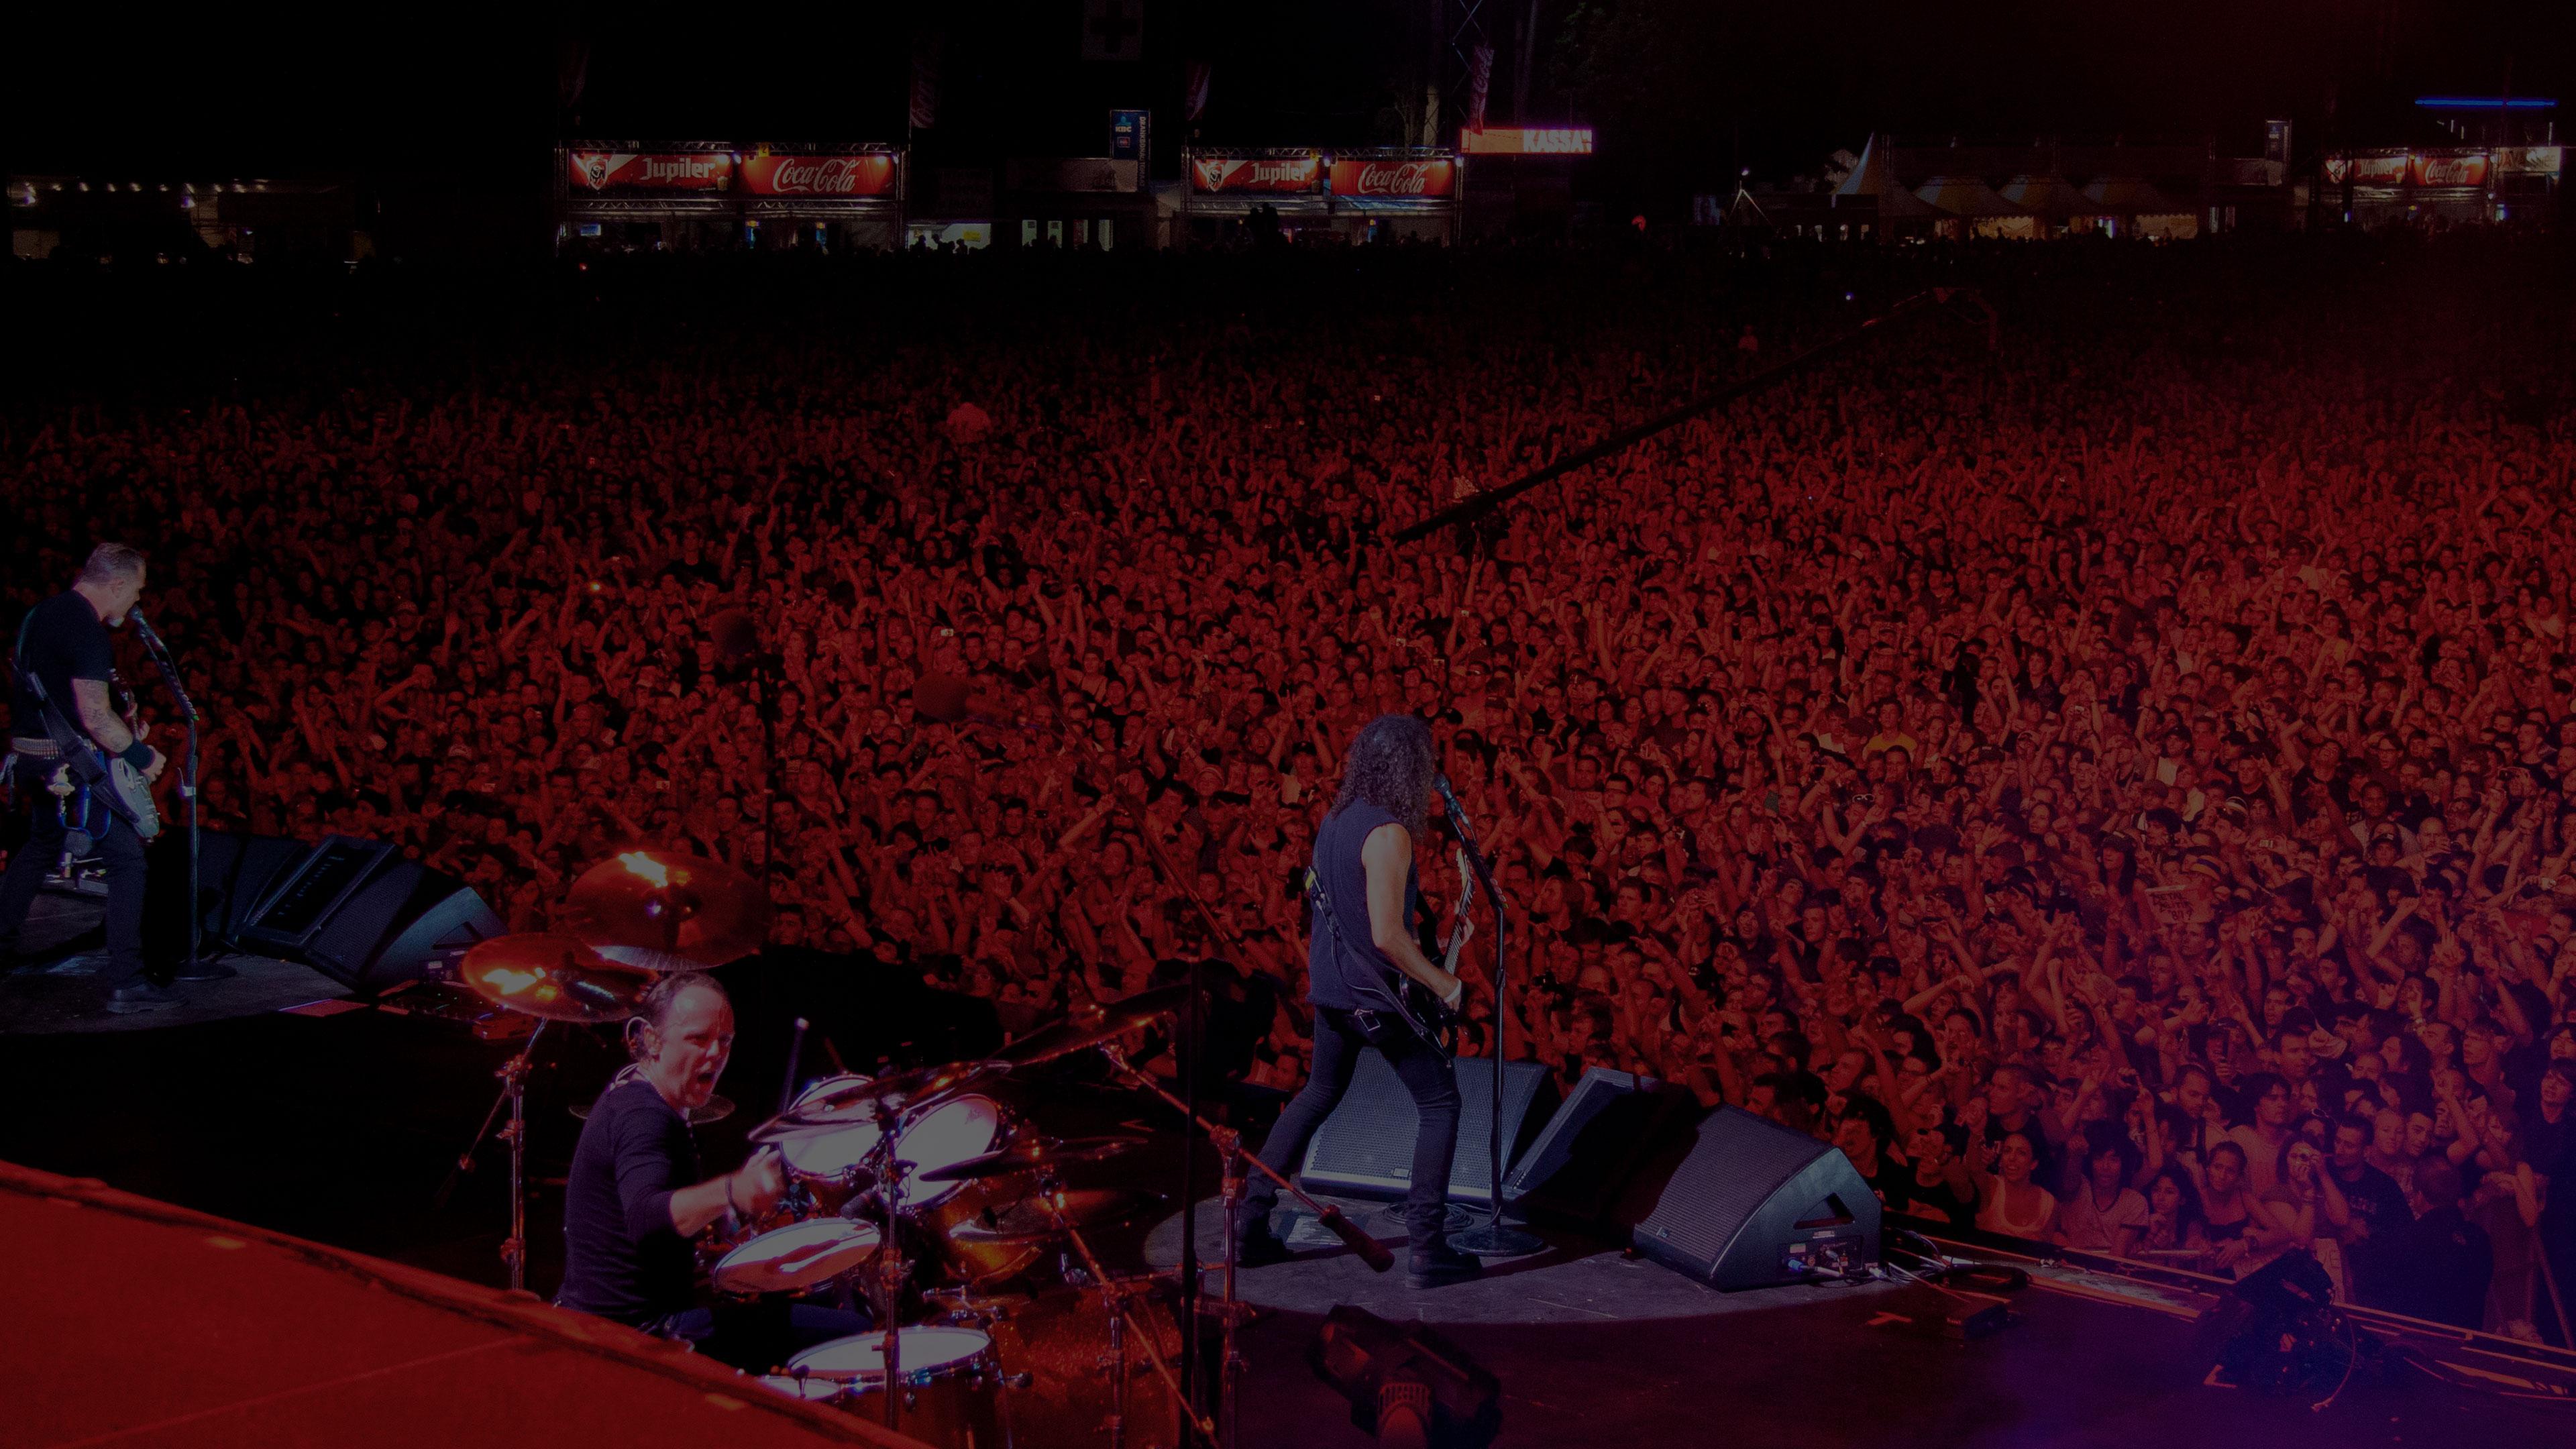 Banner Image for the photo gallery from the gig in Werchter, Belgium shot on July 5, 2009